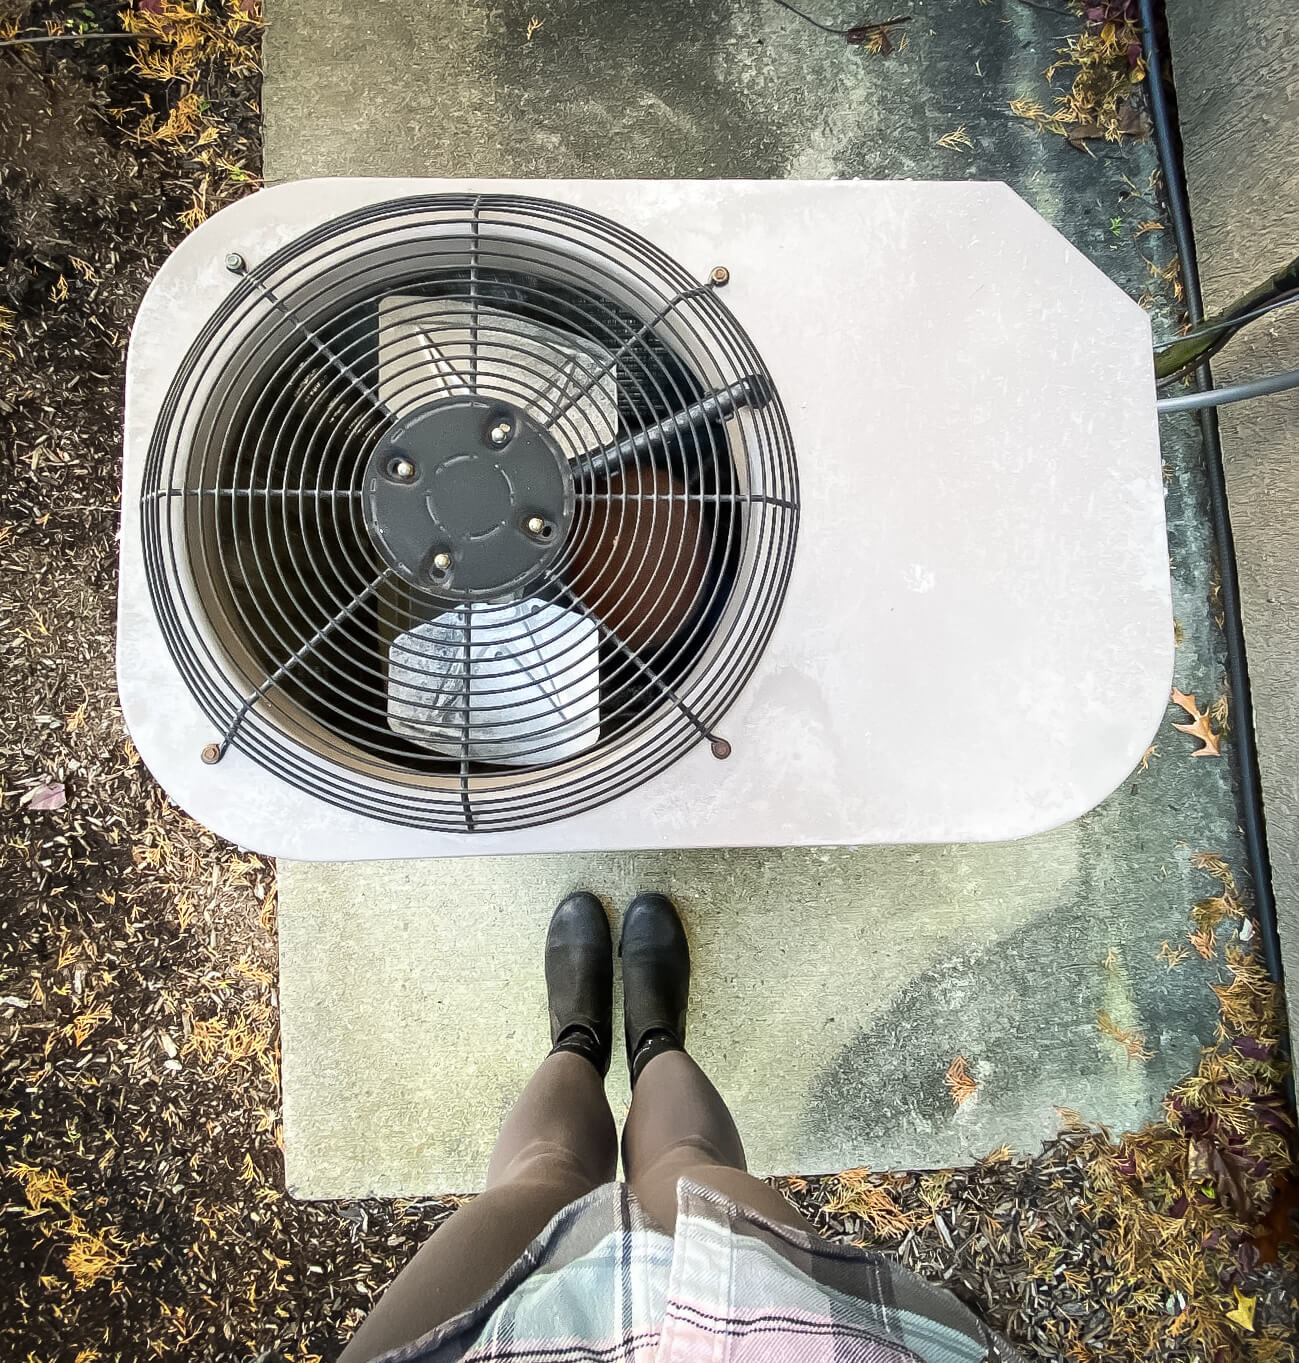 A view looking down at a central air conditioning fan. The photographer's legs and feet are shown.